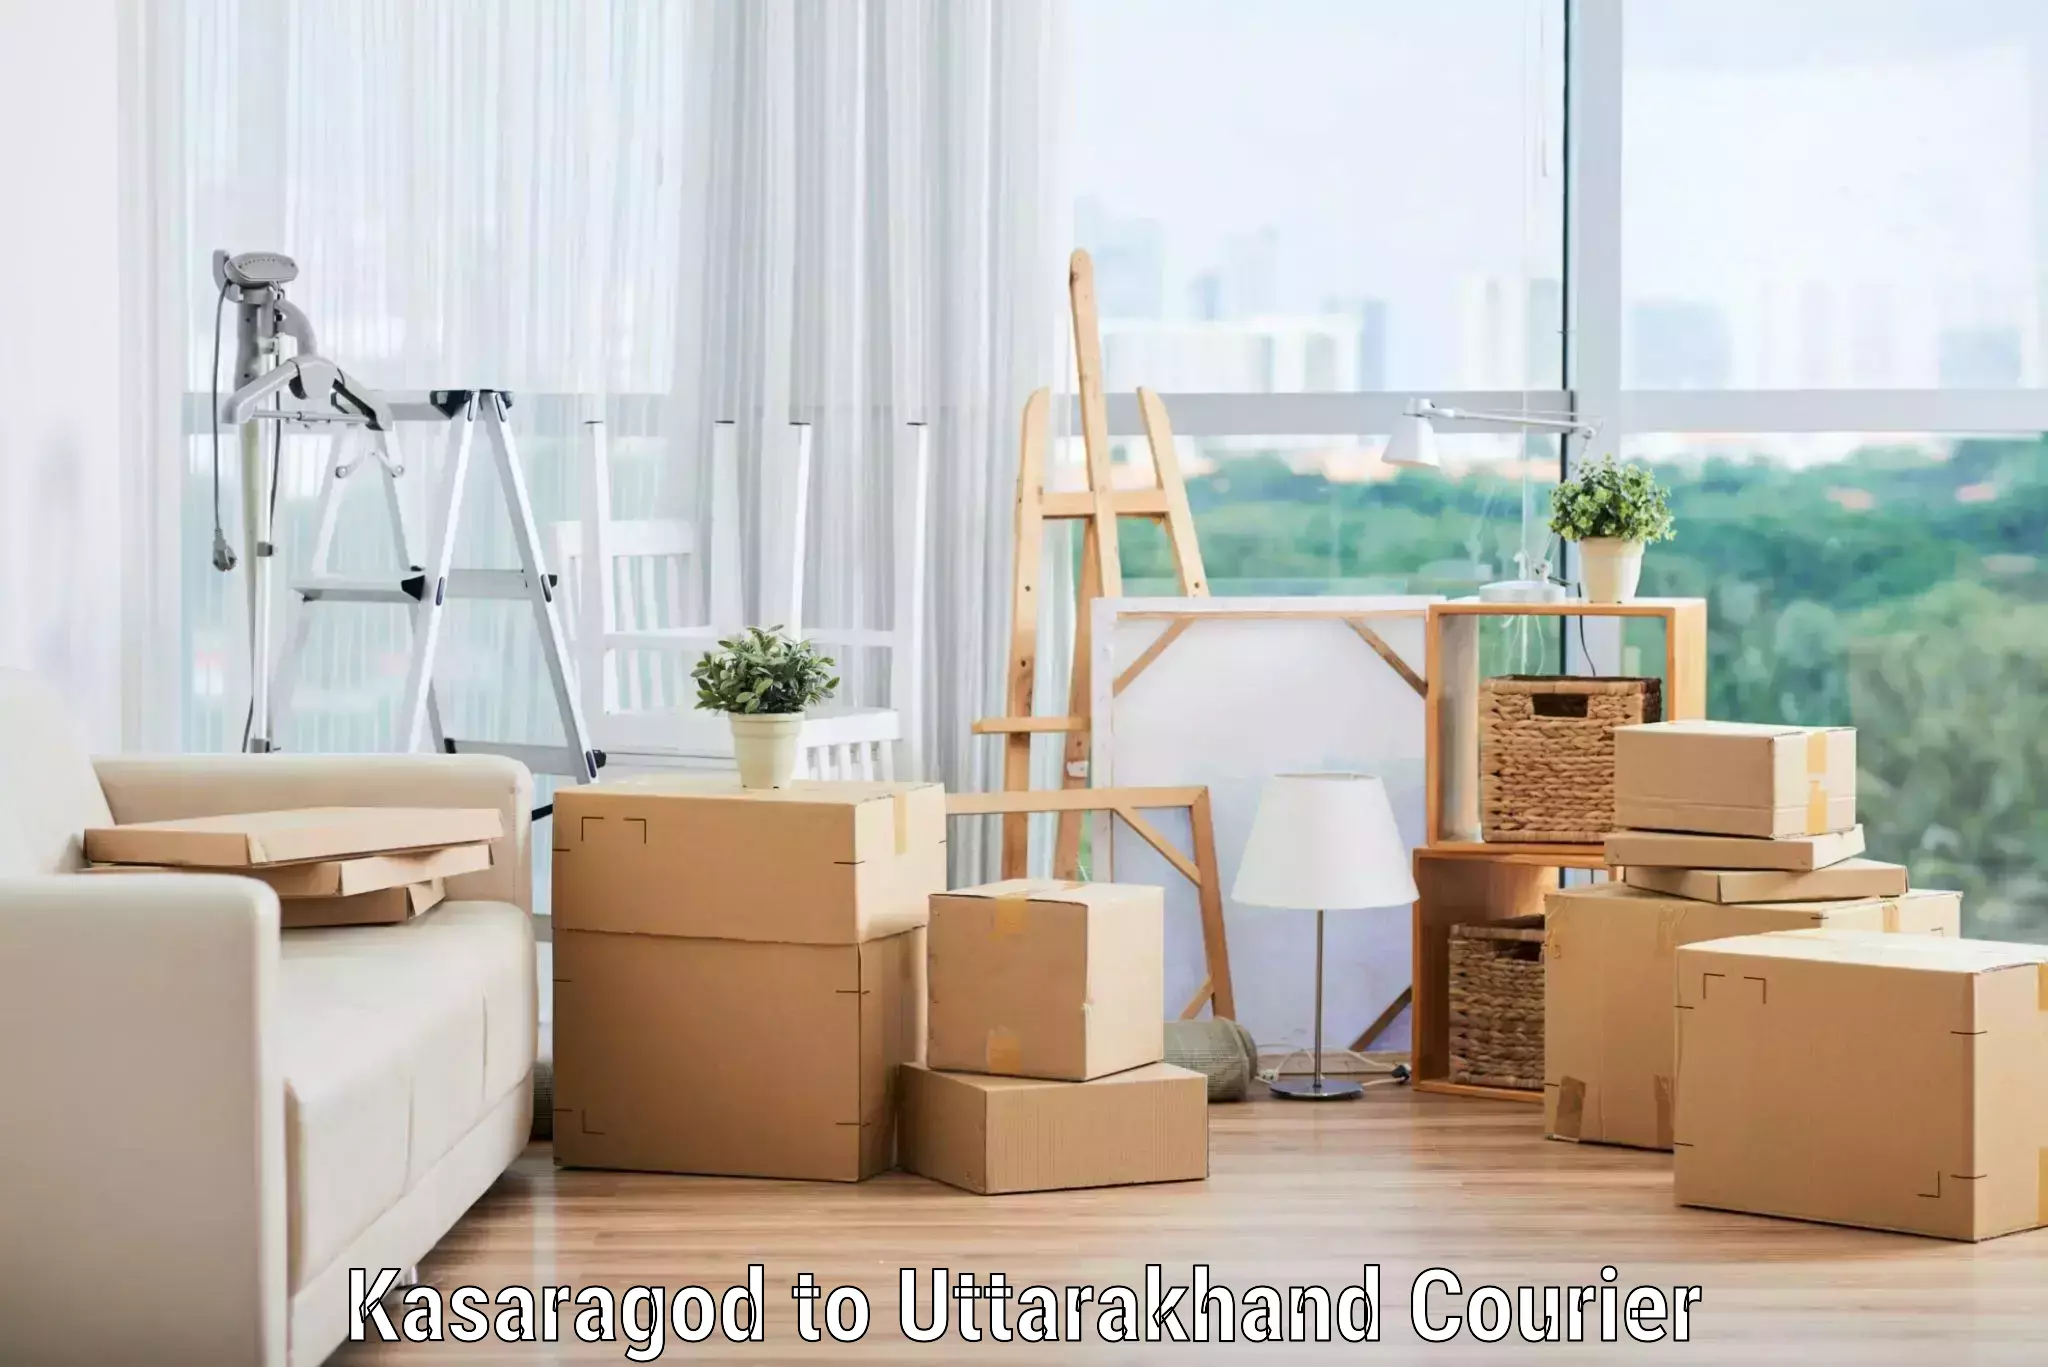 Trusted furniture movers in Kasaragod to Uttarakhand